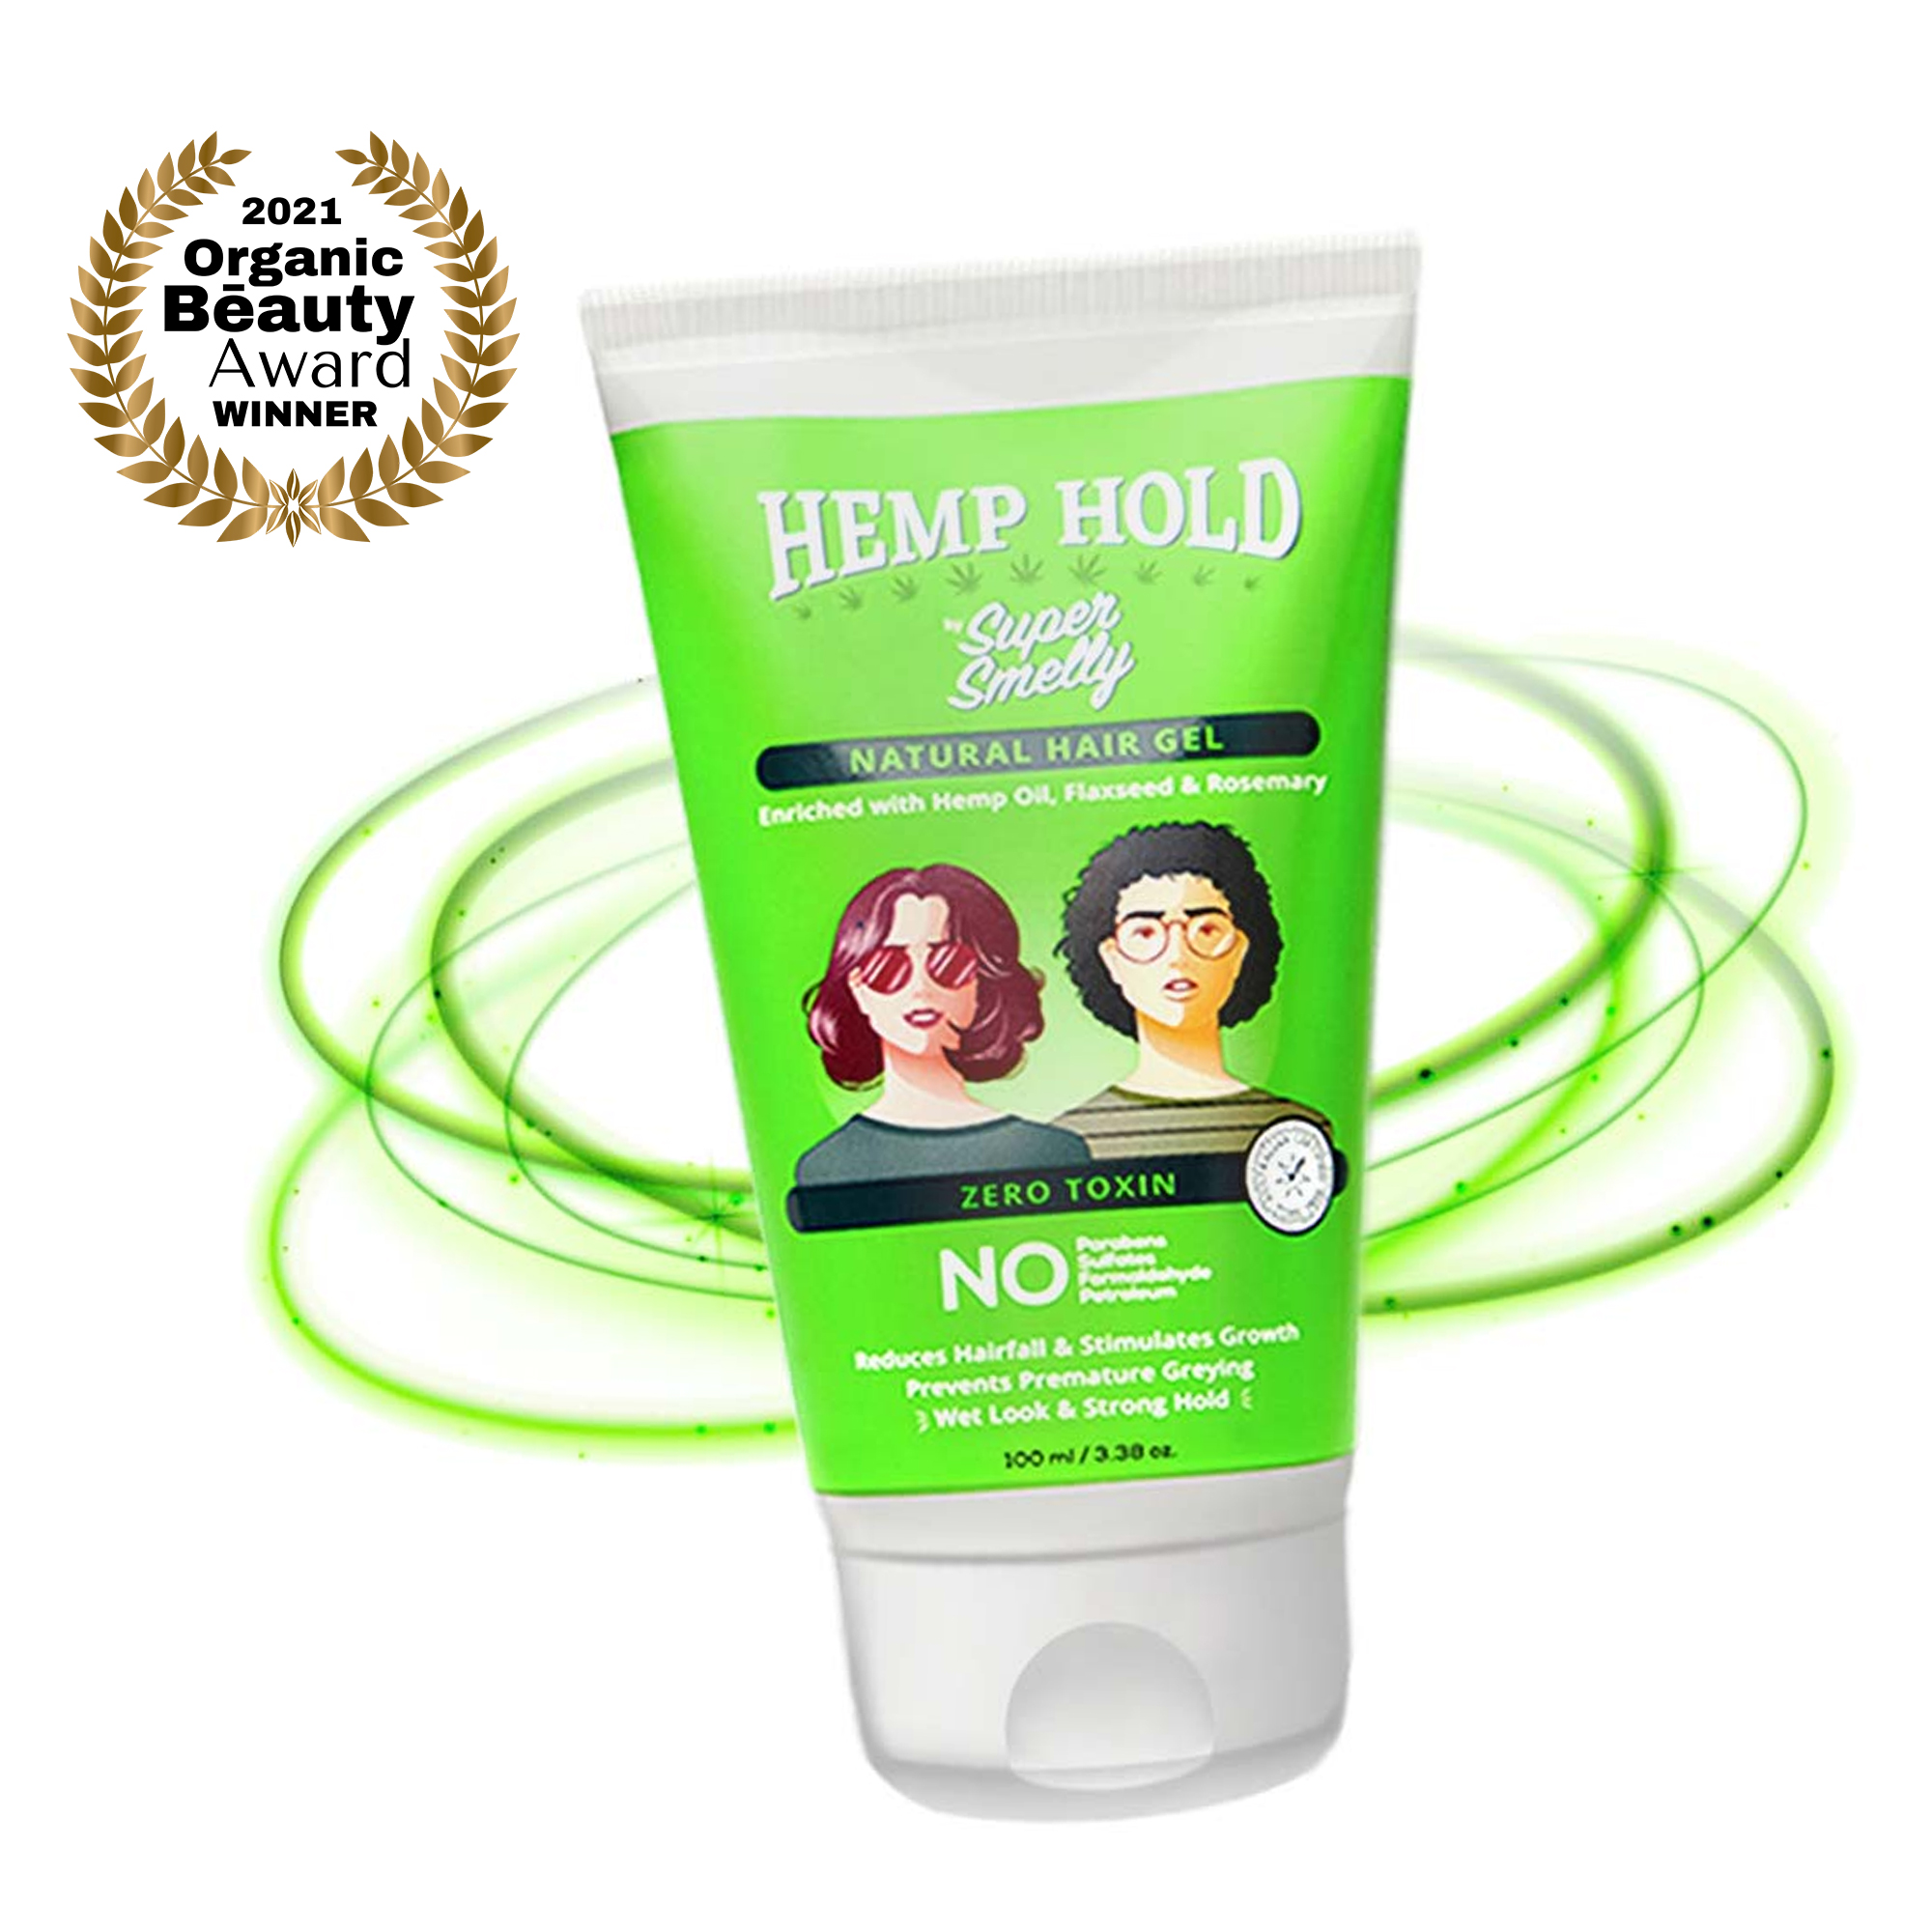 Flaxseed Hair Gel | Style your Hair with Hemp Hold Natural Hair Gel